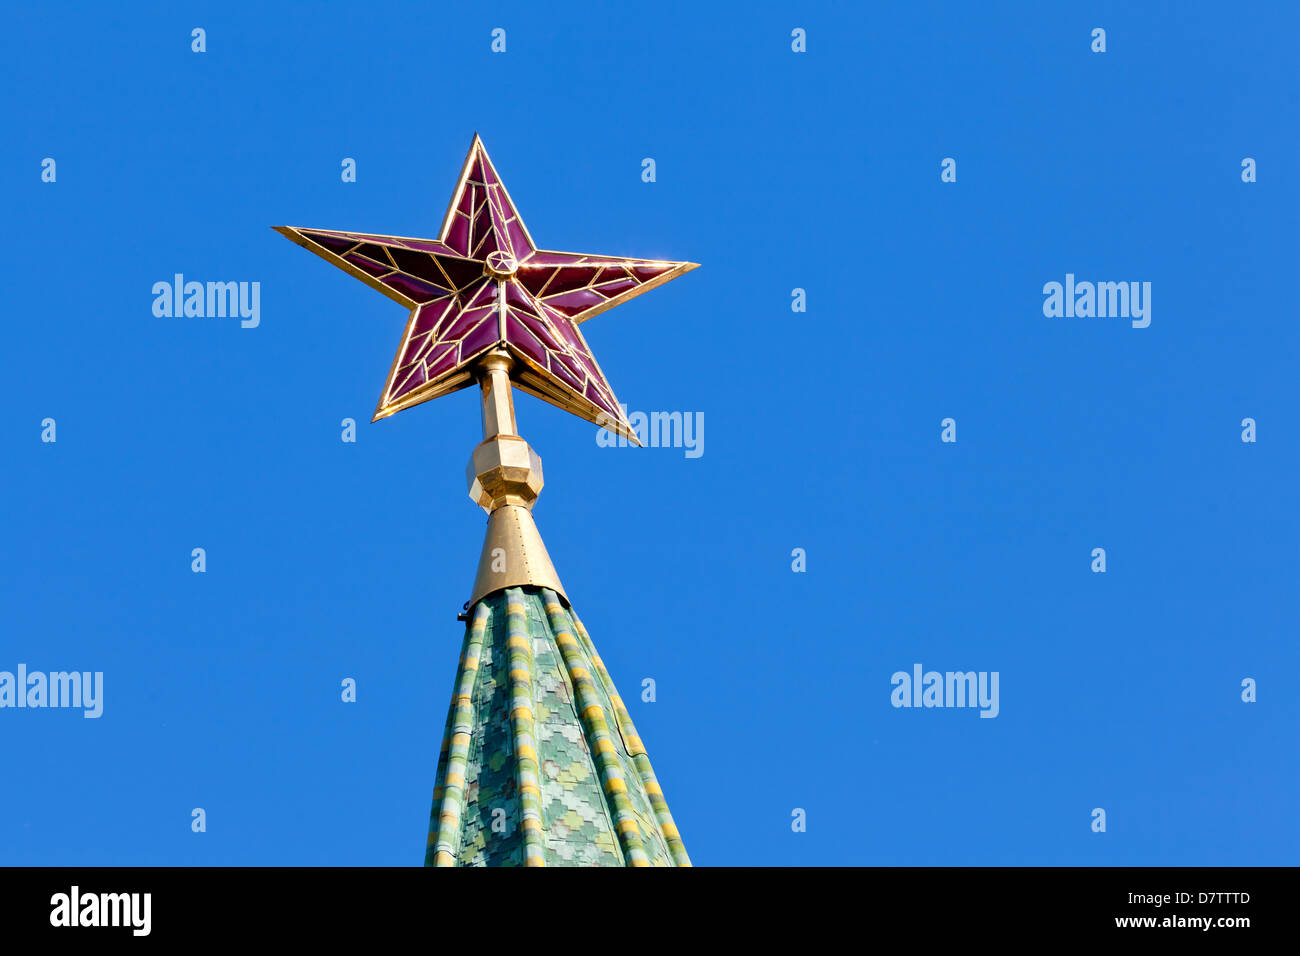 A red star on the top tower of Moscow Kremlin, Russia Stock Photo